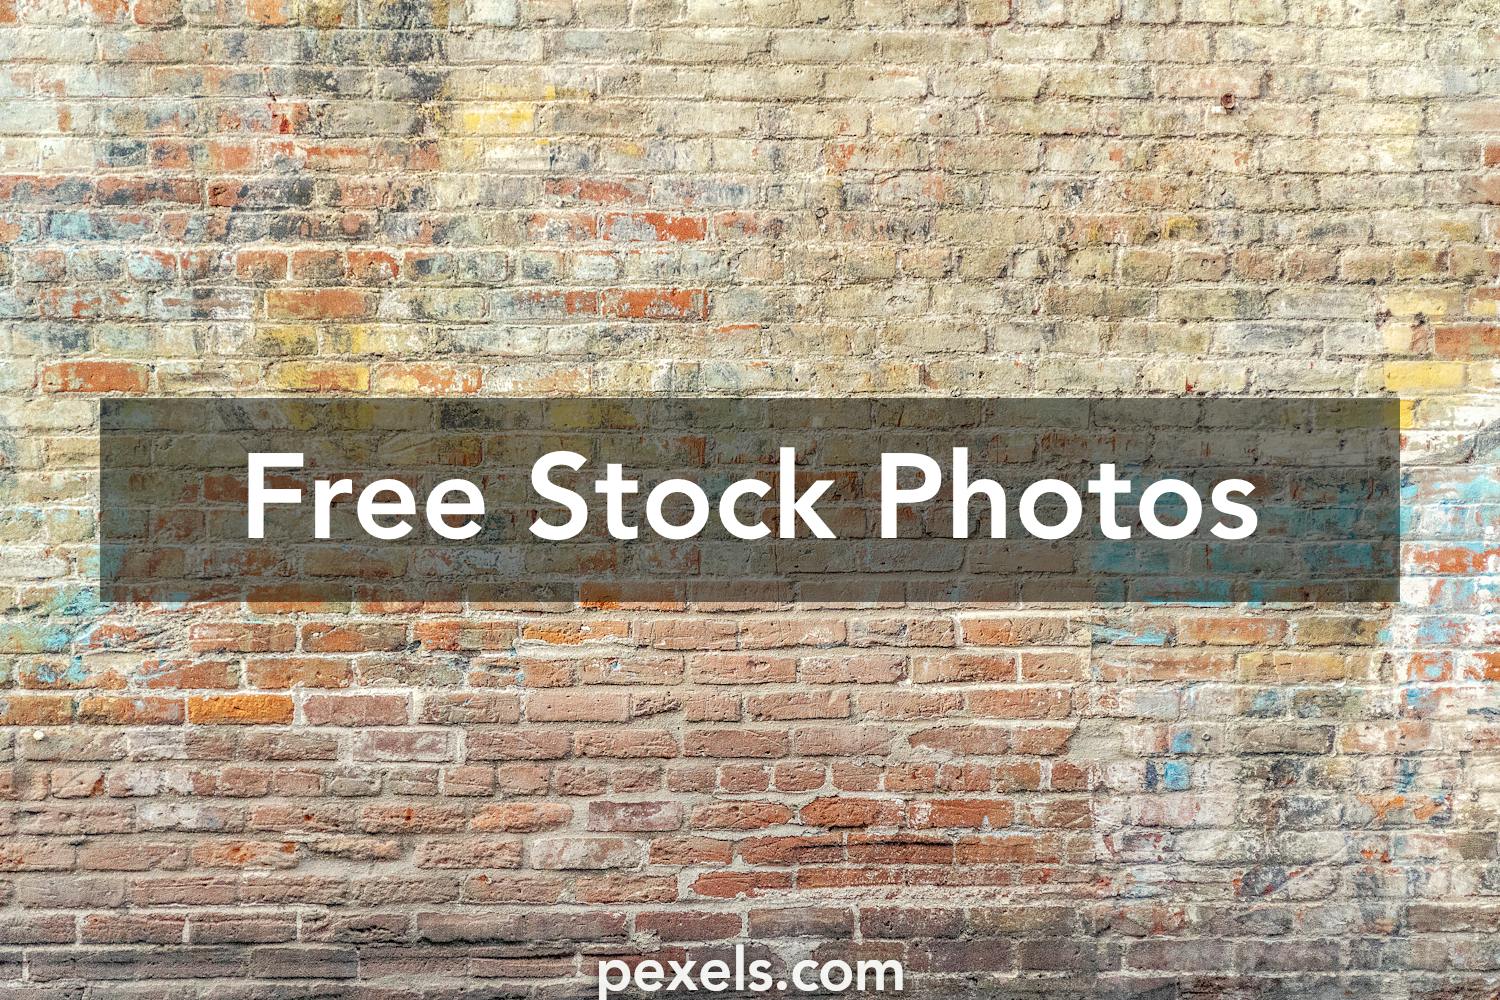 Royalty Free Green Screen Backgrounds - Best Free Green Screen